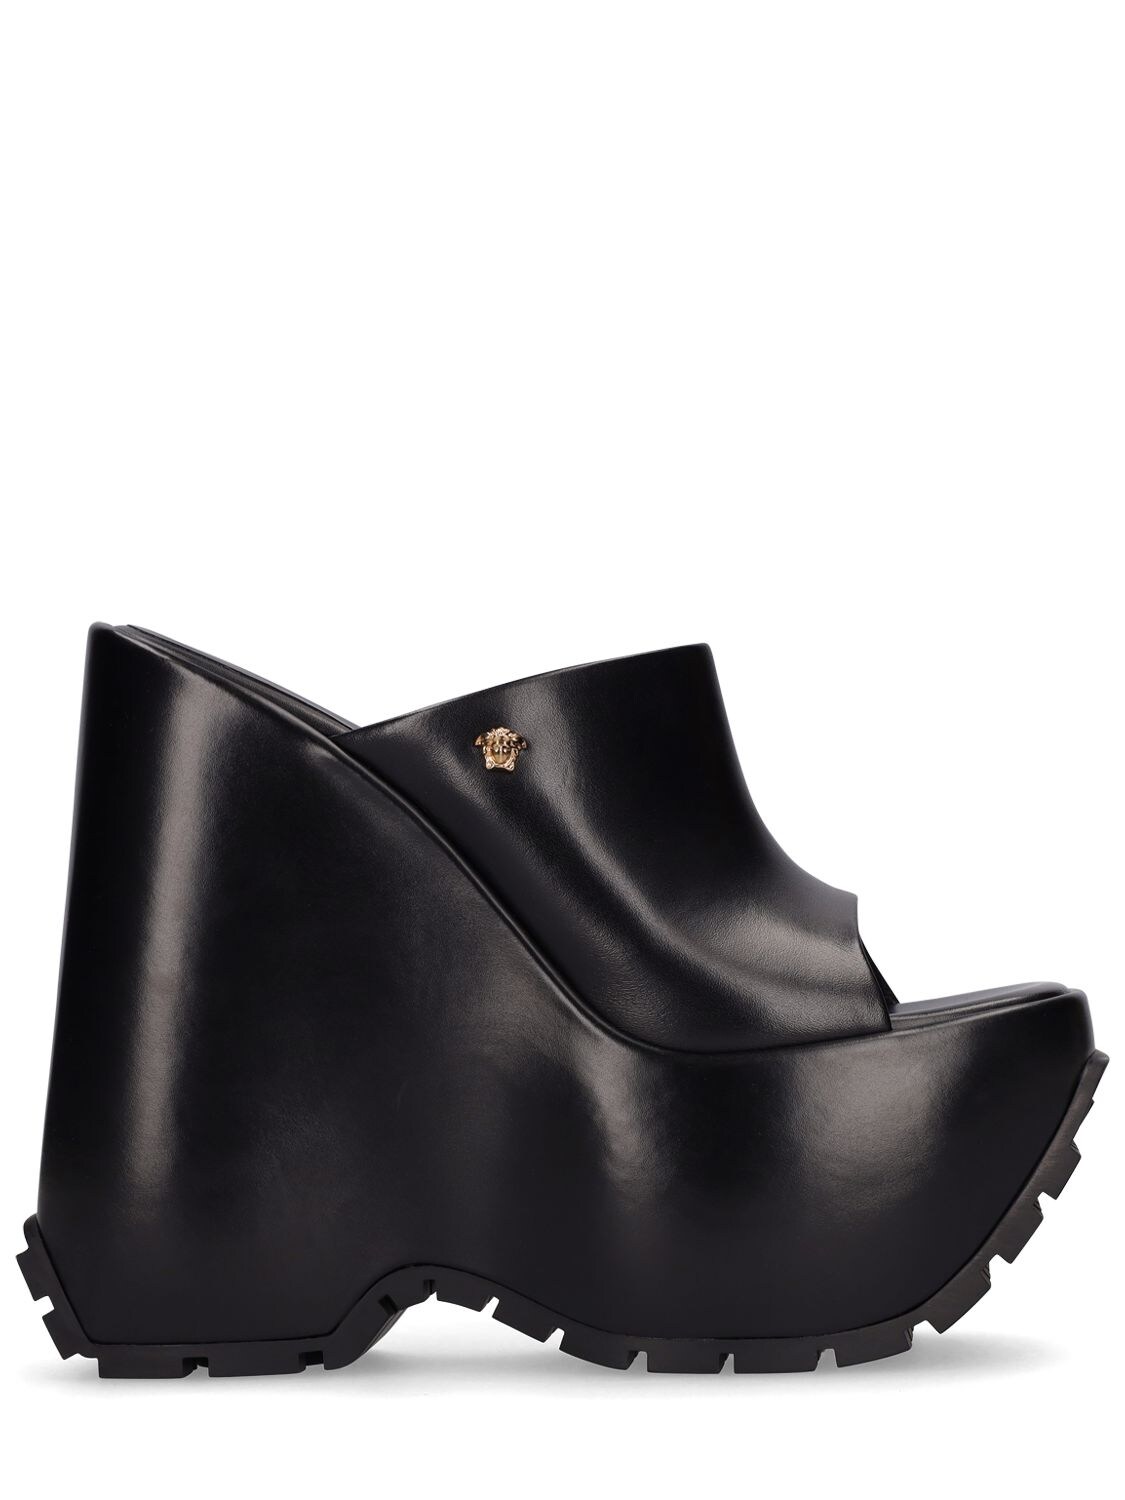 VERSACE 160mm Leather Wedge Mules